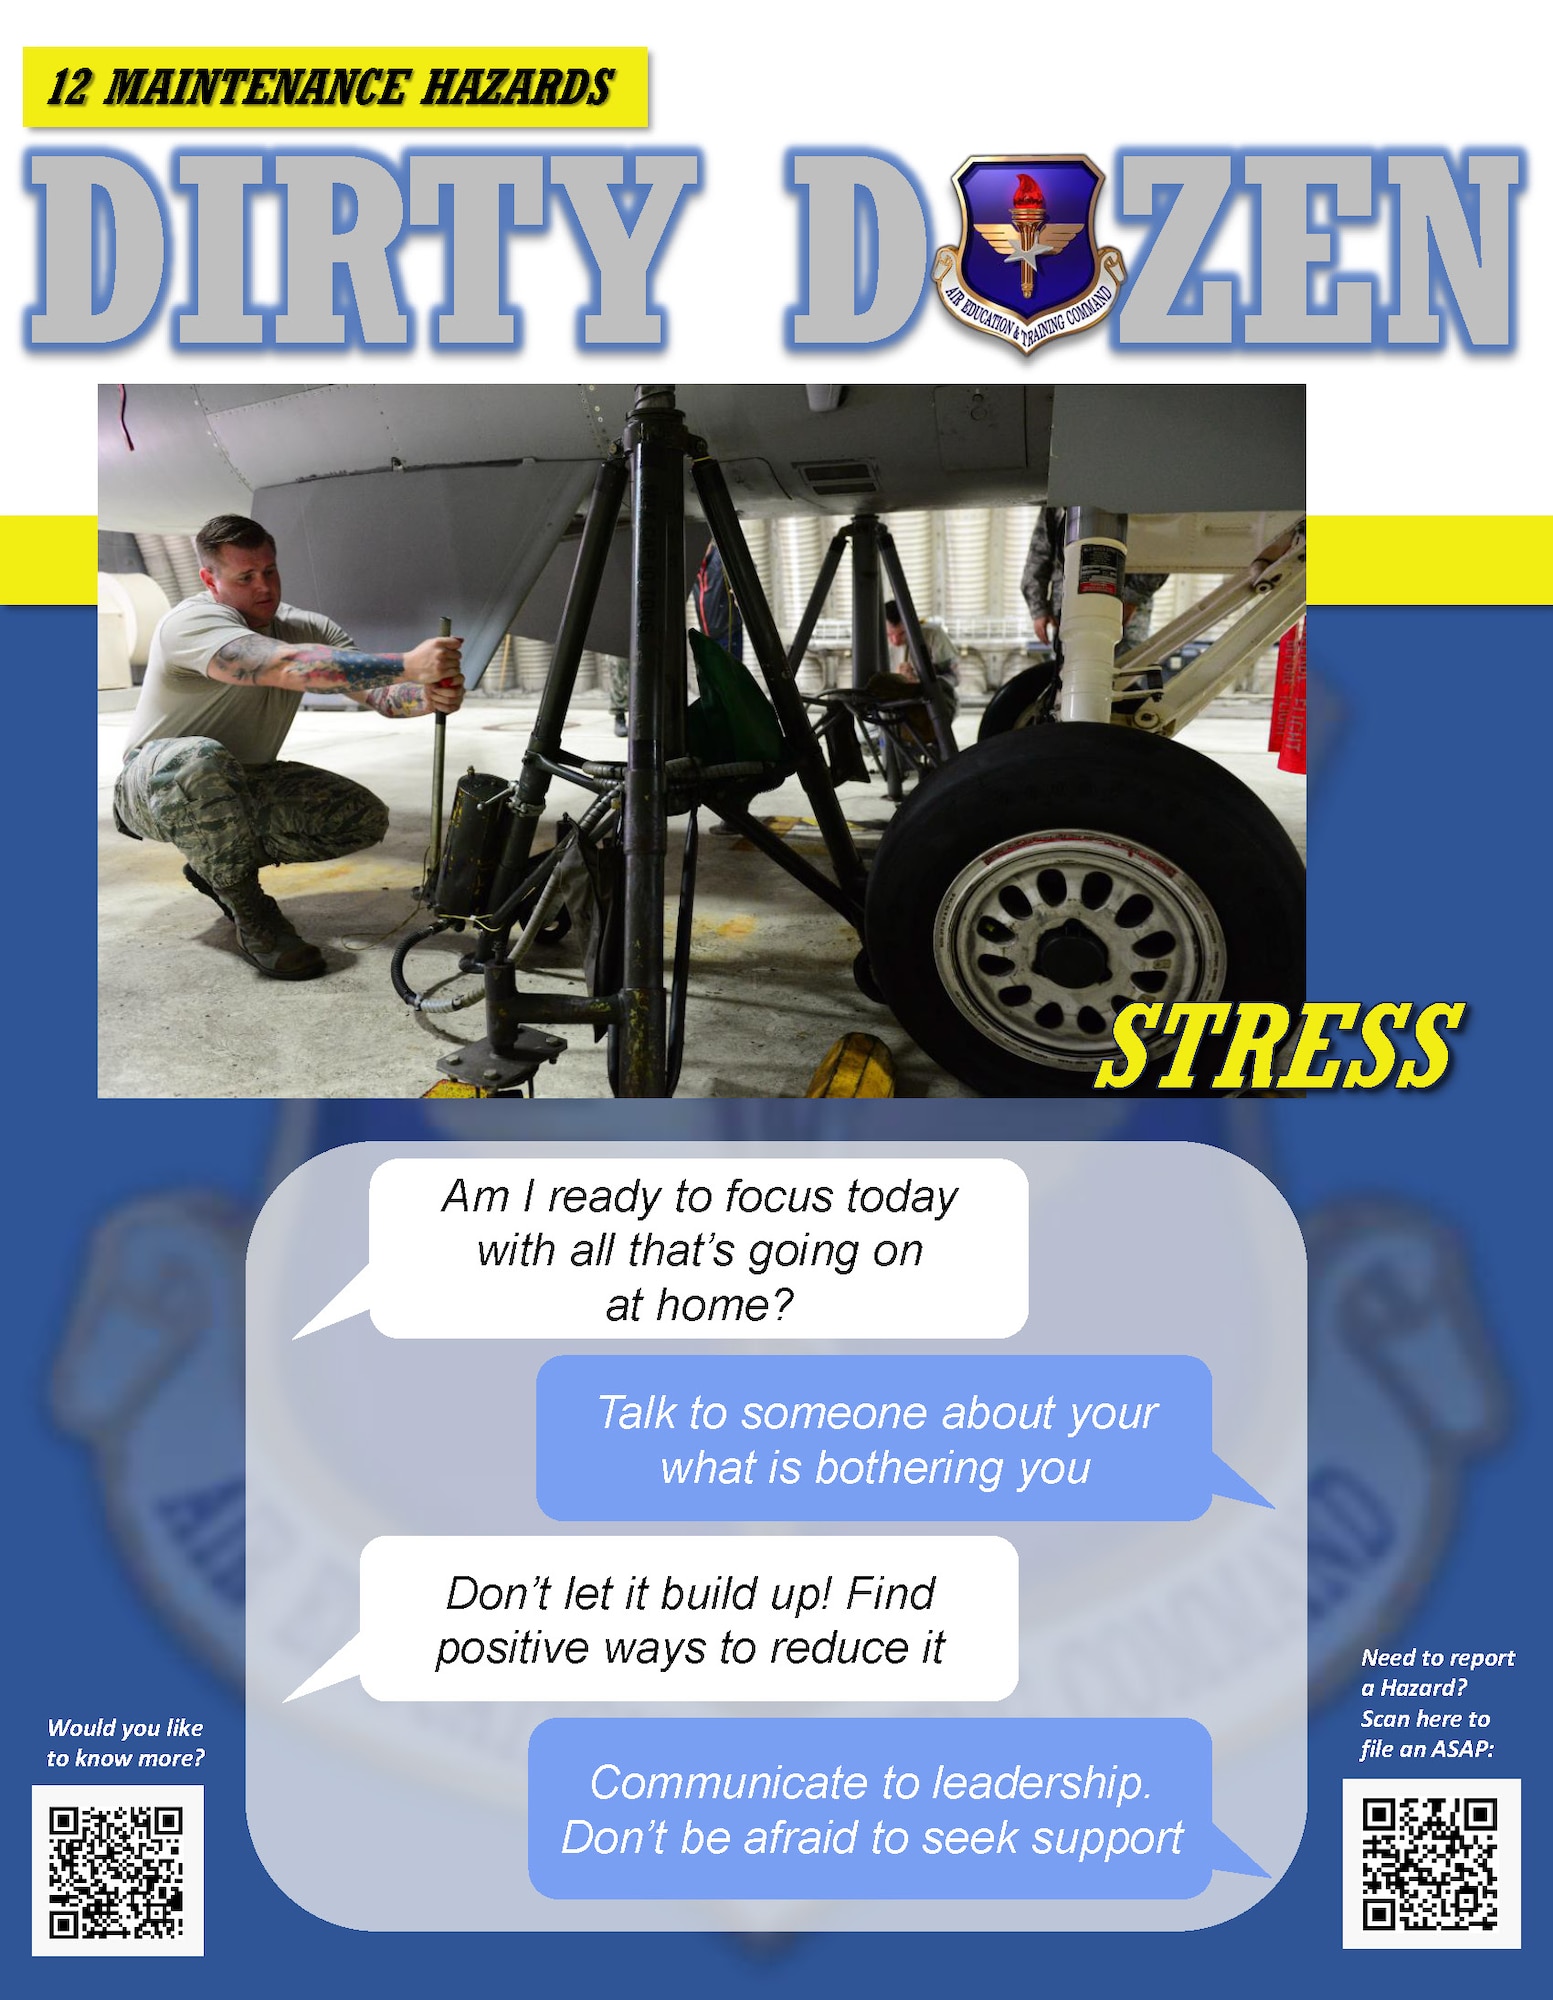 Stress is one of the Dirty Dozen, which highlights common human error factors in aircraft maintenance mishaps.